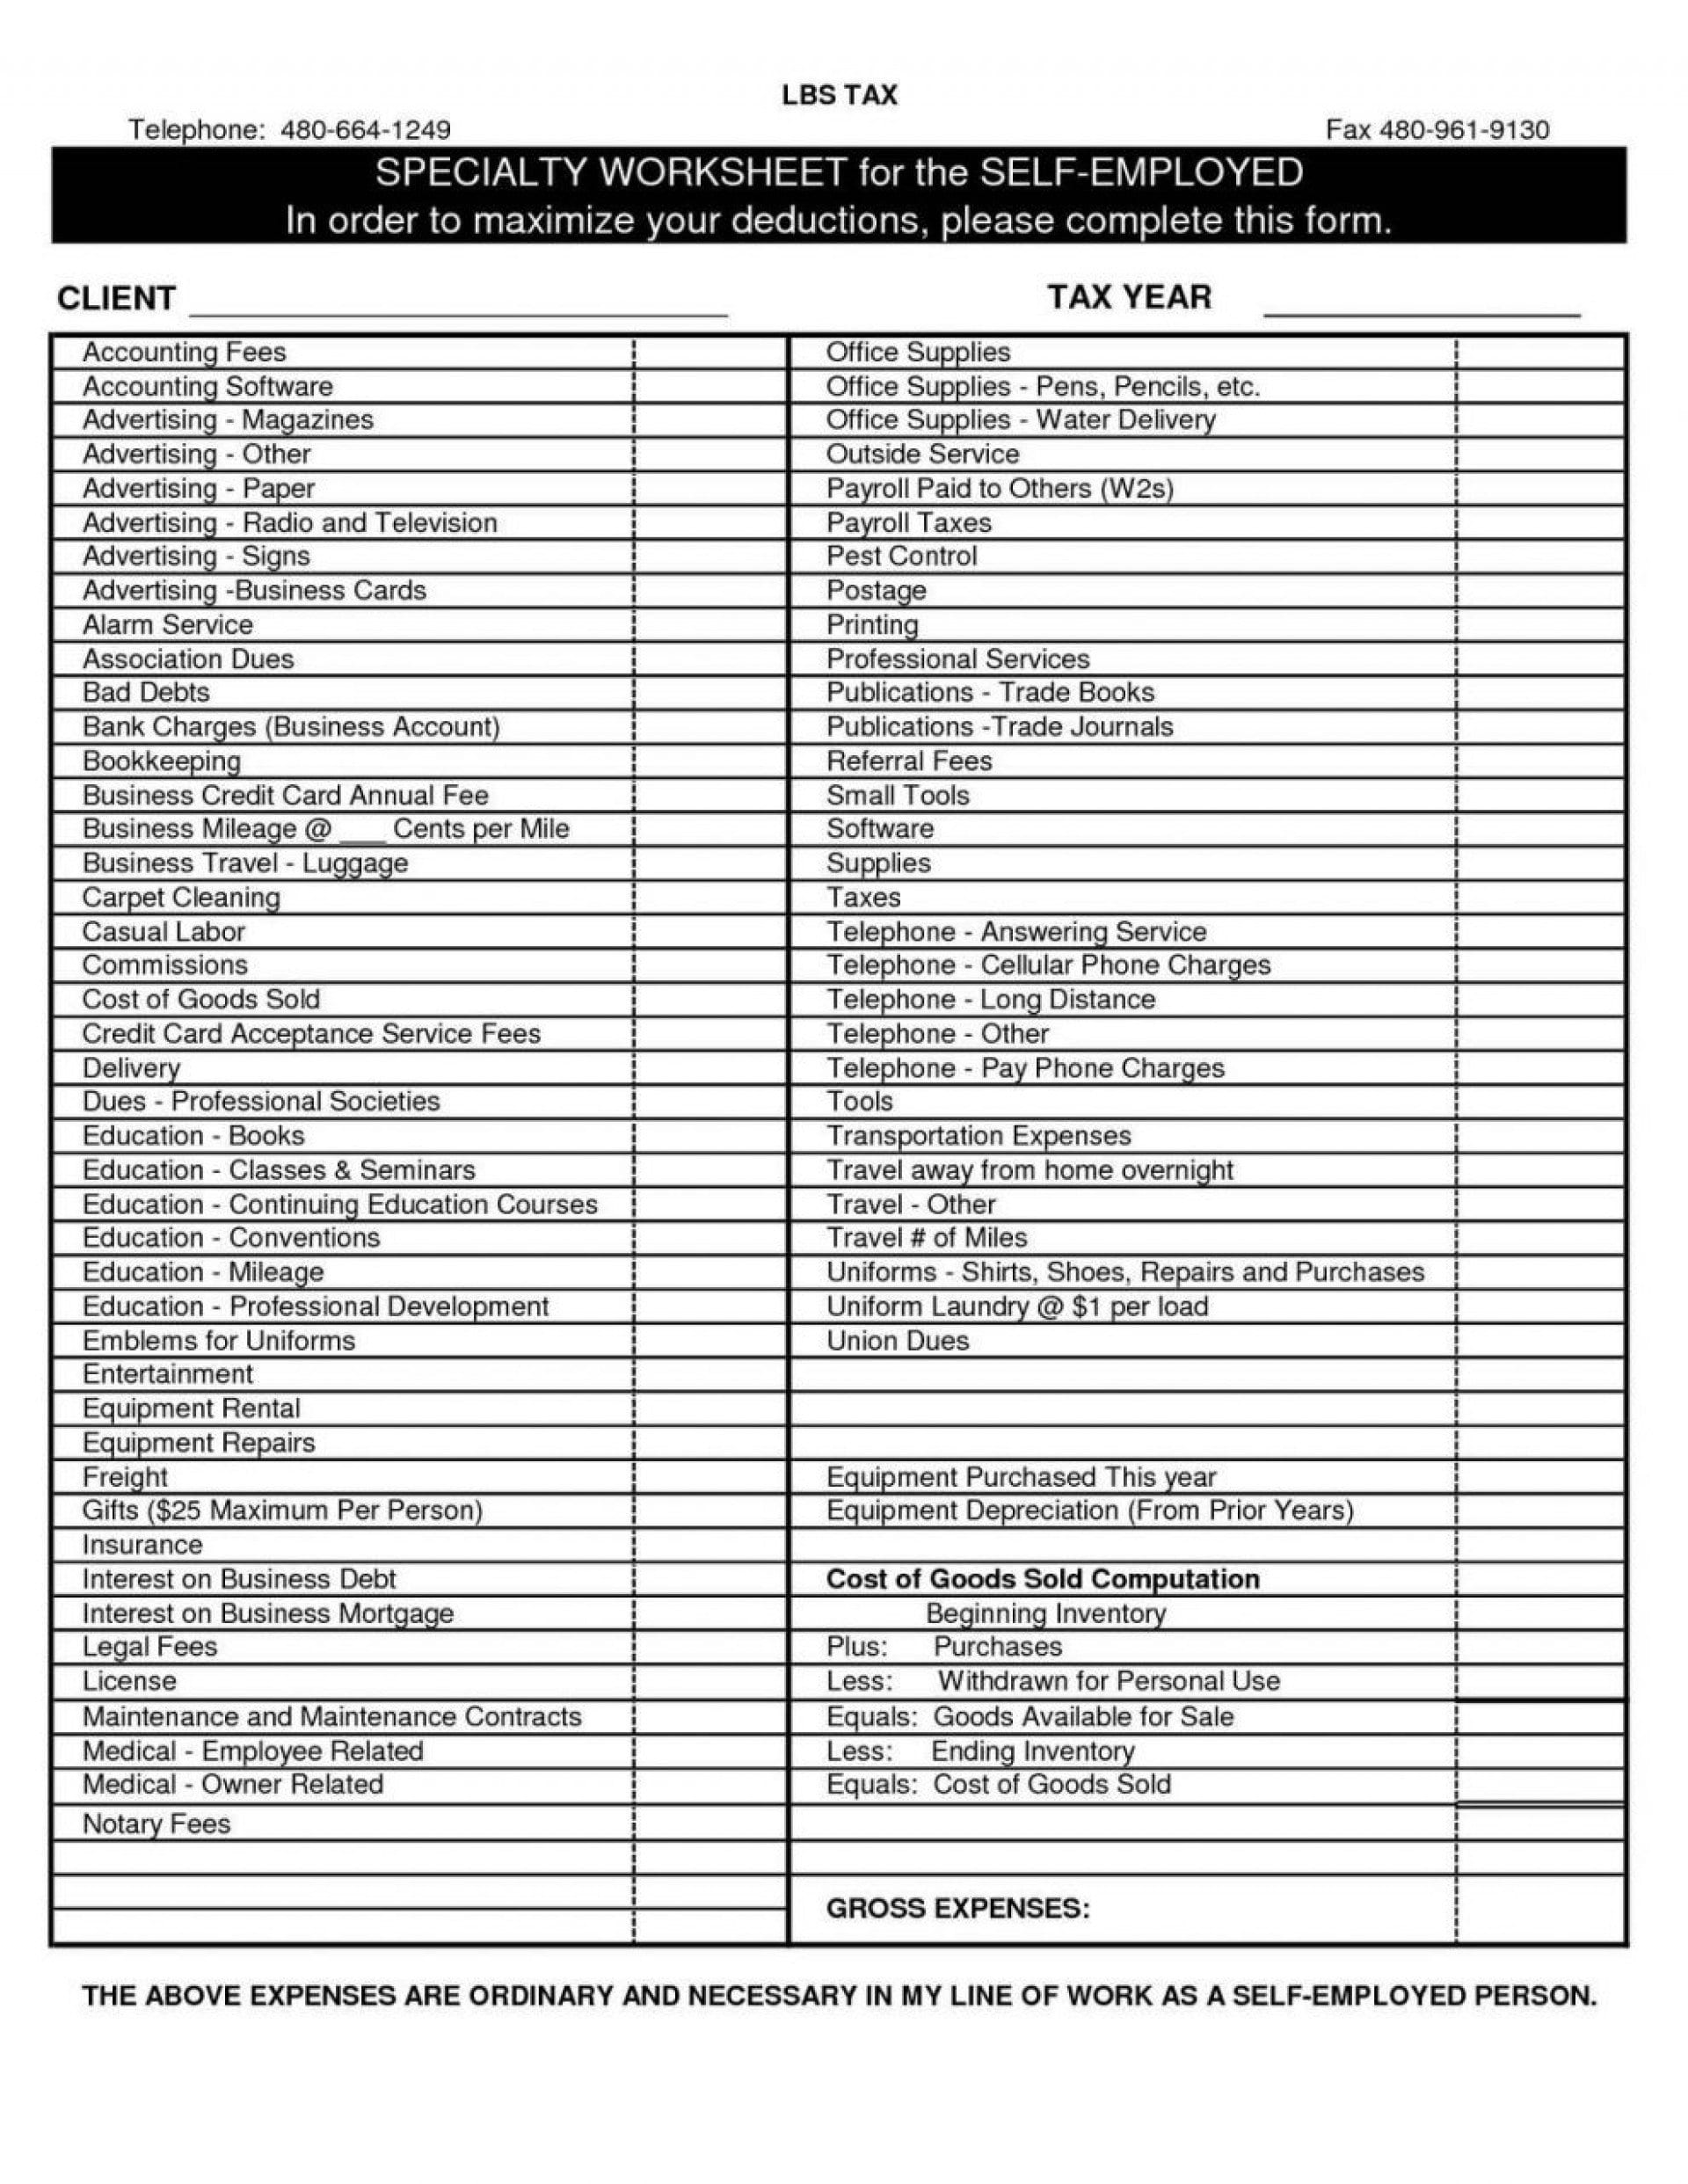 2017 Self Employment Tax And Deduction Worksheet  Yooob Along With Tax Worksheet 2017